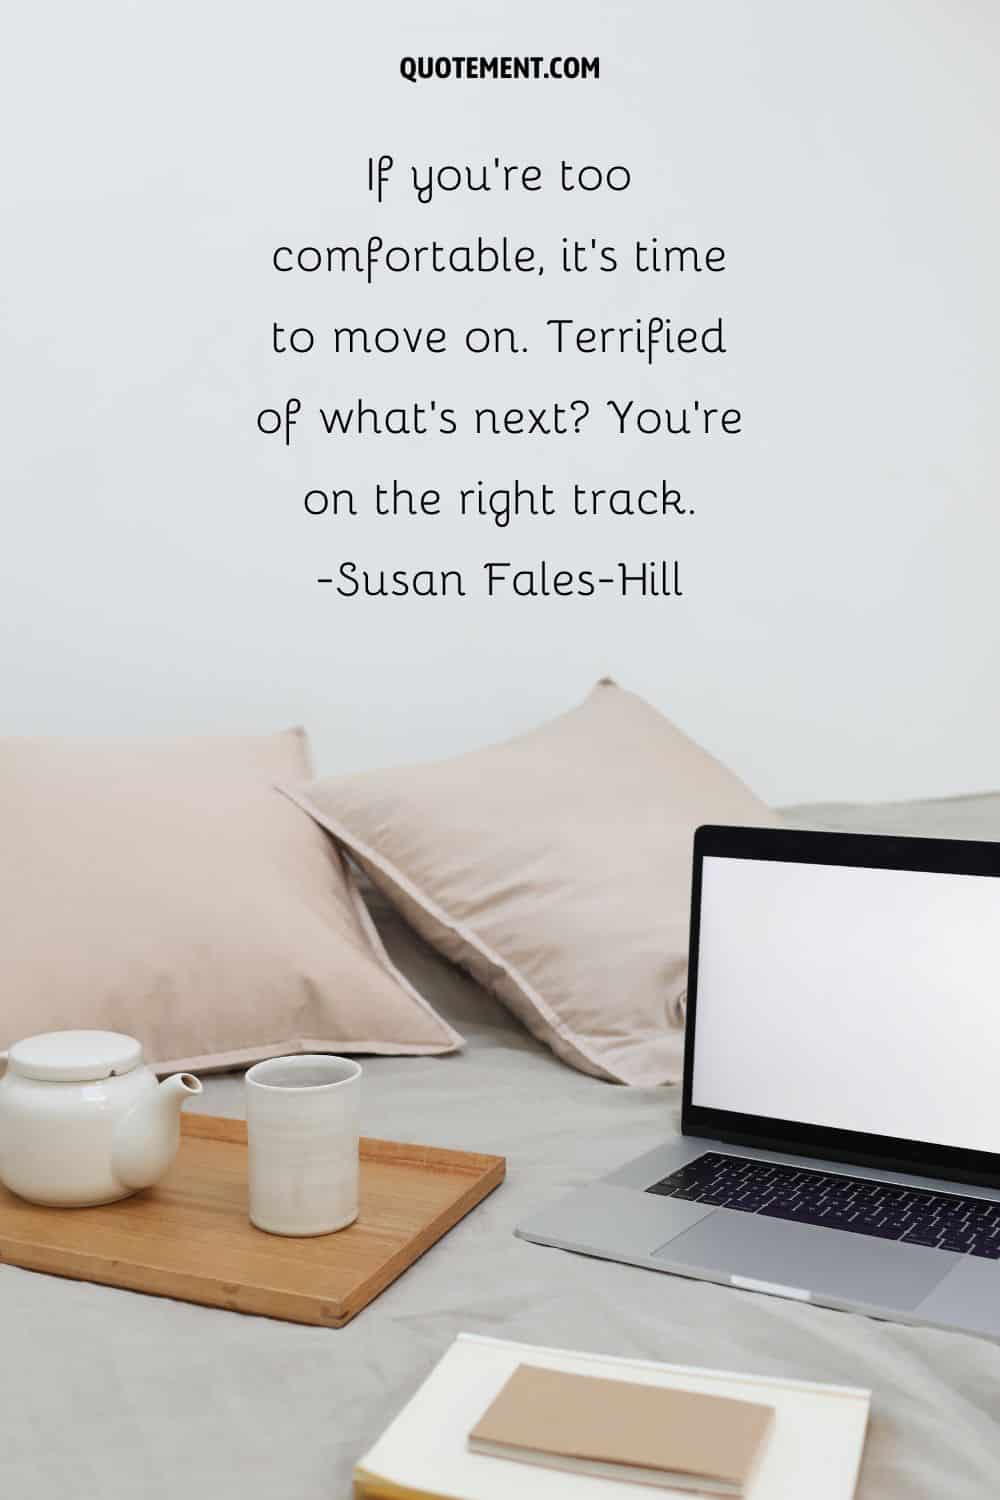 “If you’re too comfortable, it’s time to move on. Terrified of what’s next You’re on the right track.” ― Susan Fales-Hill